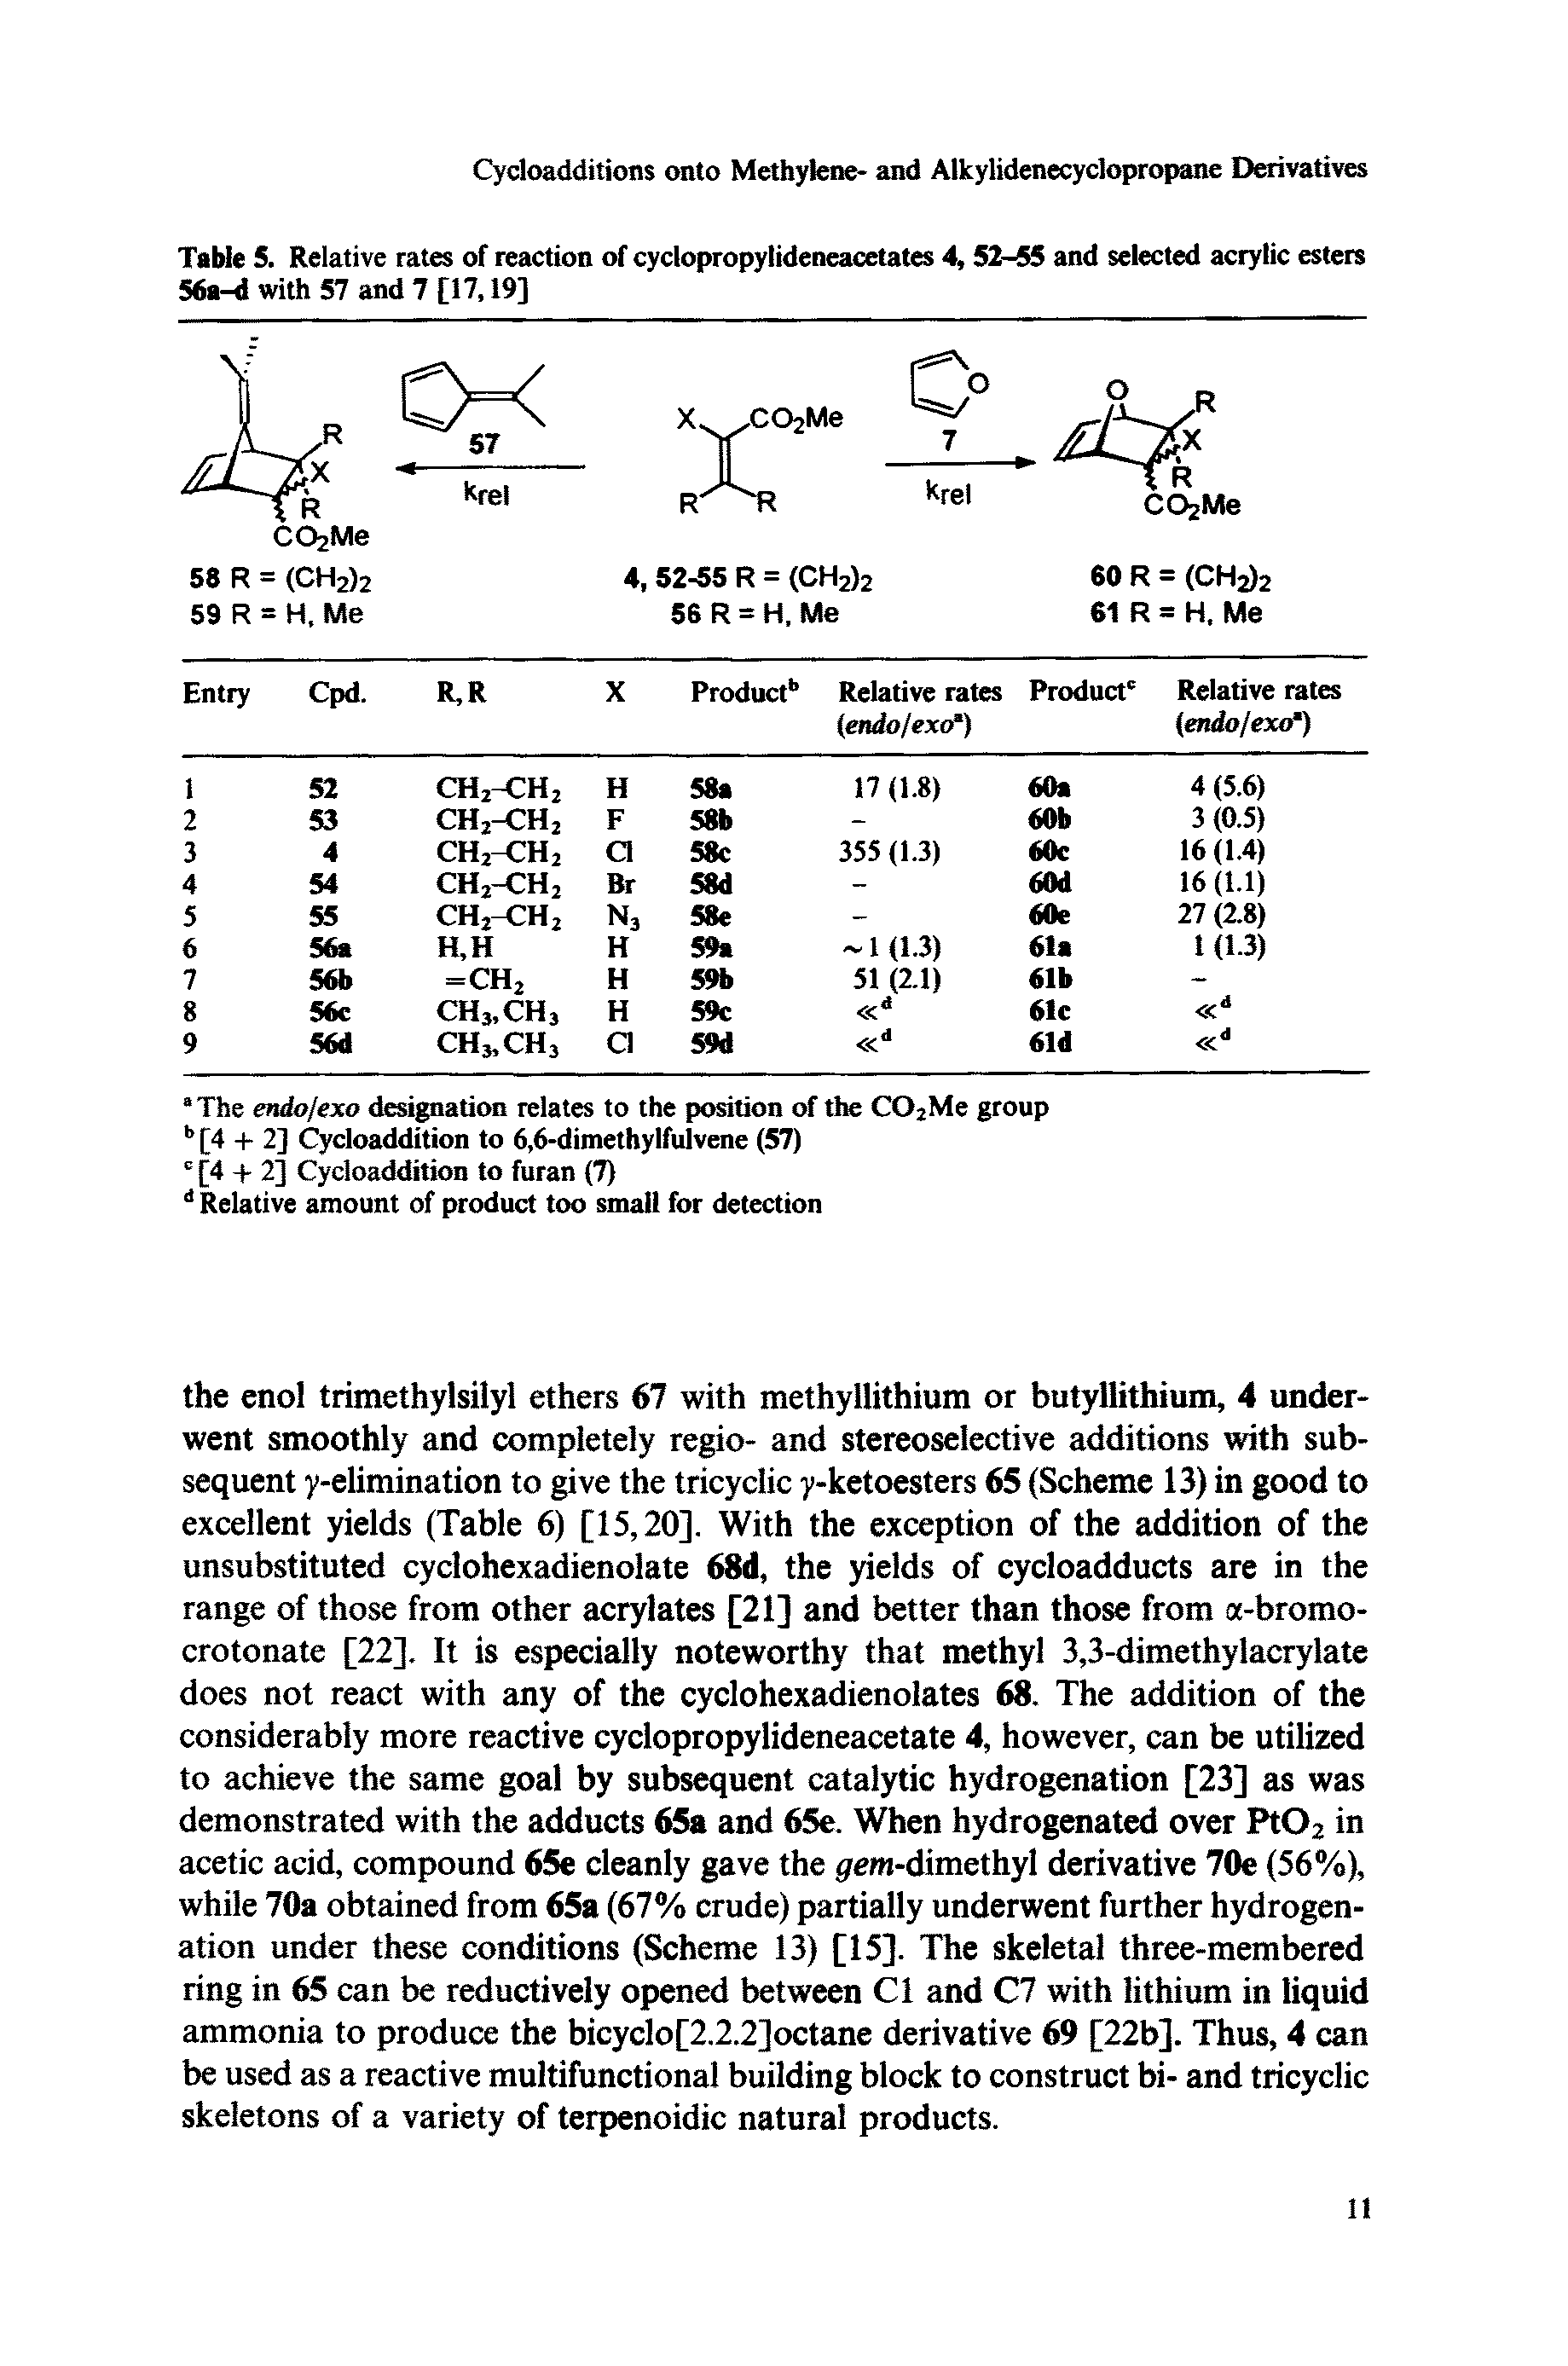 Table 5. Relative rates of reaction of cyclopropylideneacetates 4, 52-55 and selected acrylic esters 56a-d with 57 and 7 [17,19]...